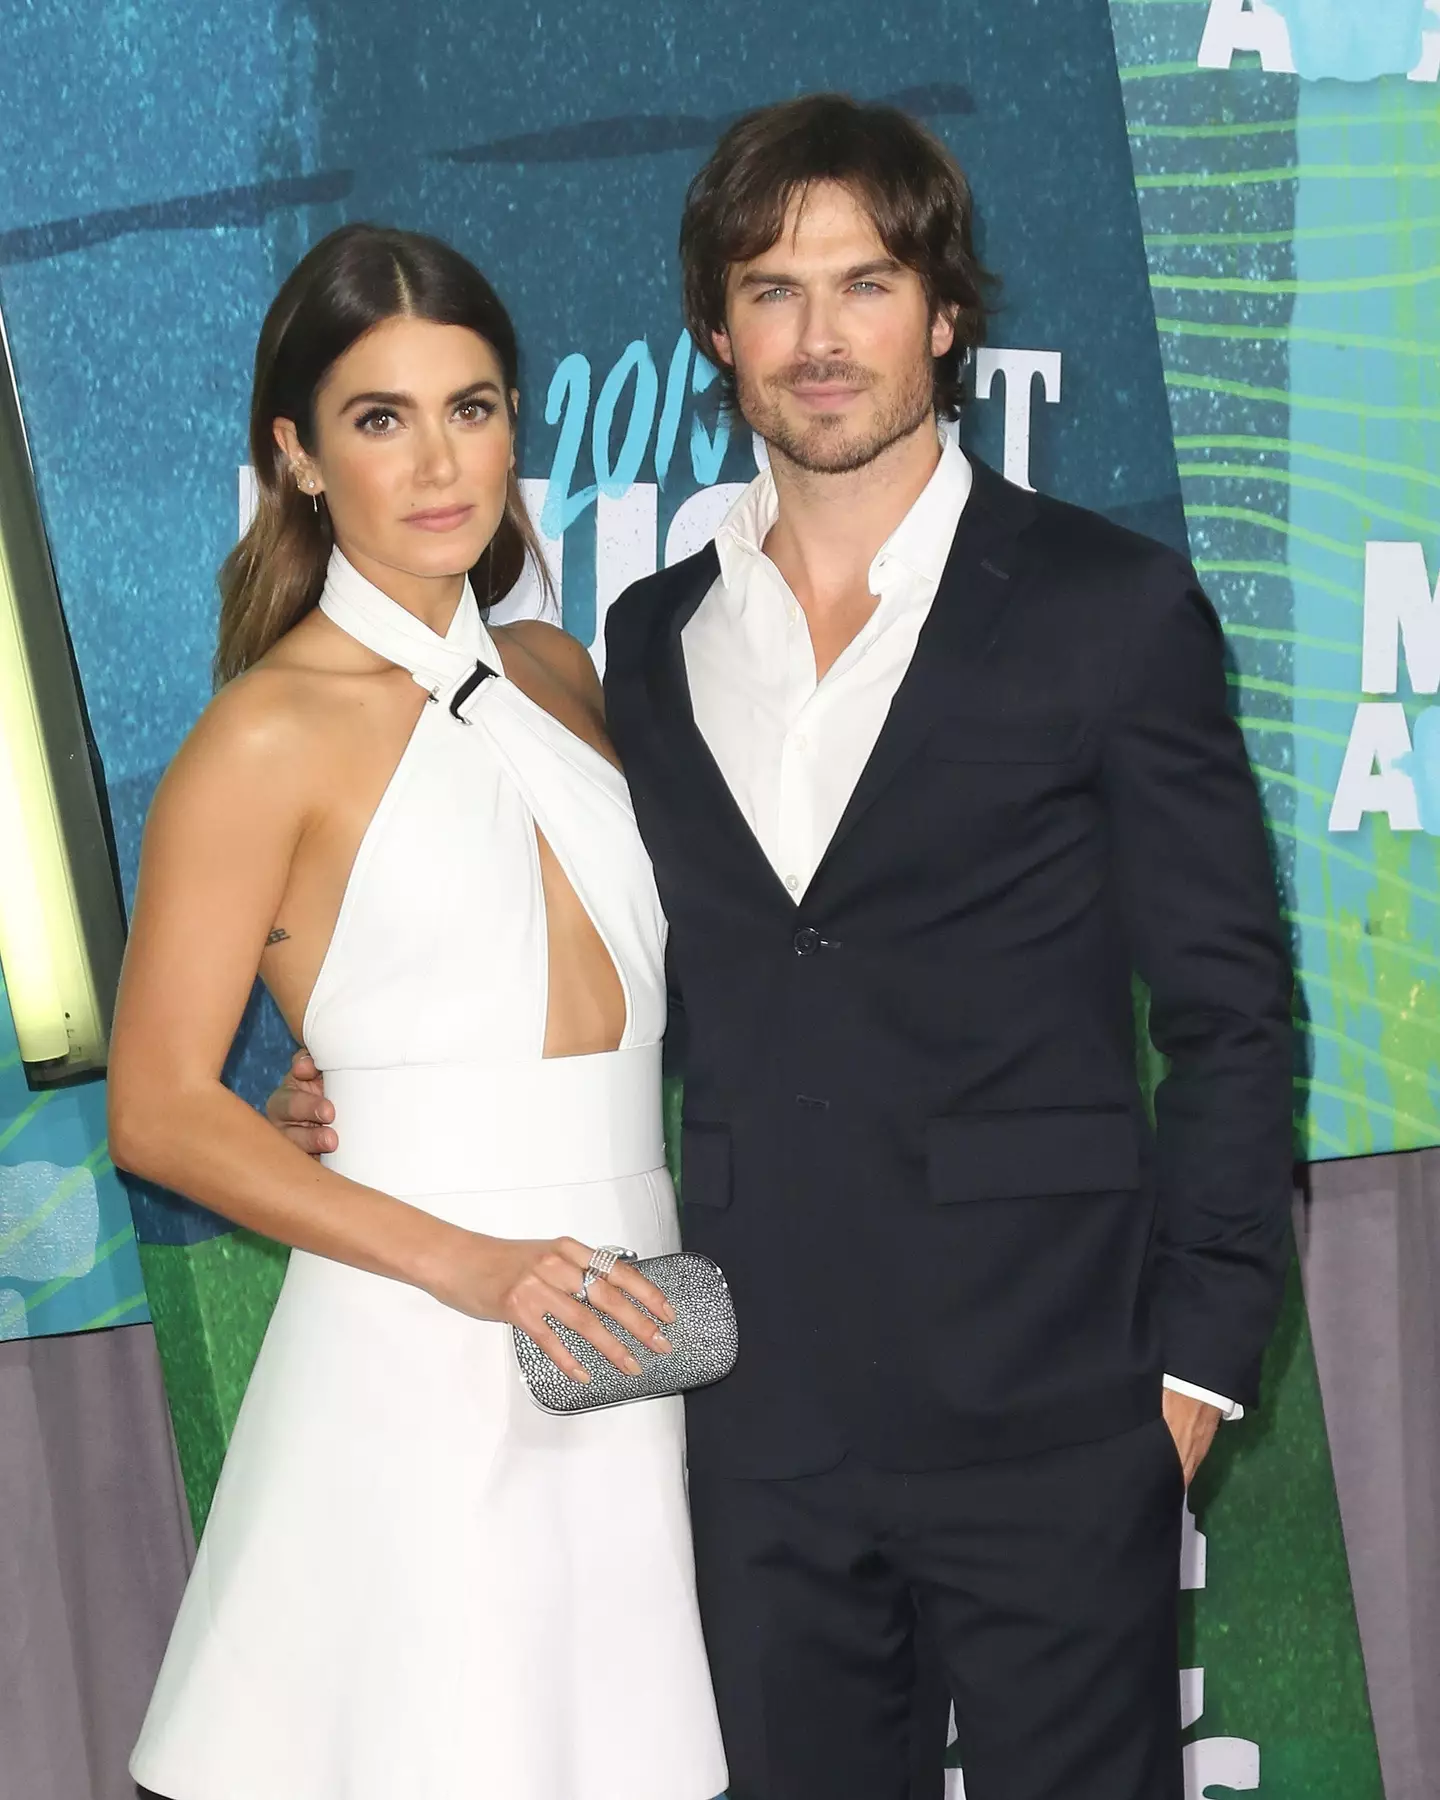 Ian Somerhalder and Nikki Reed have been married since 2015.